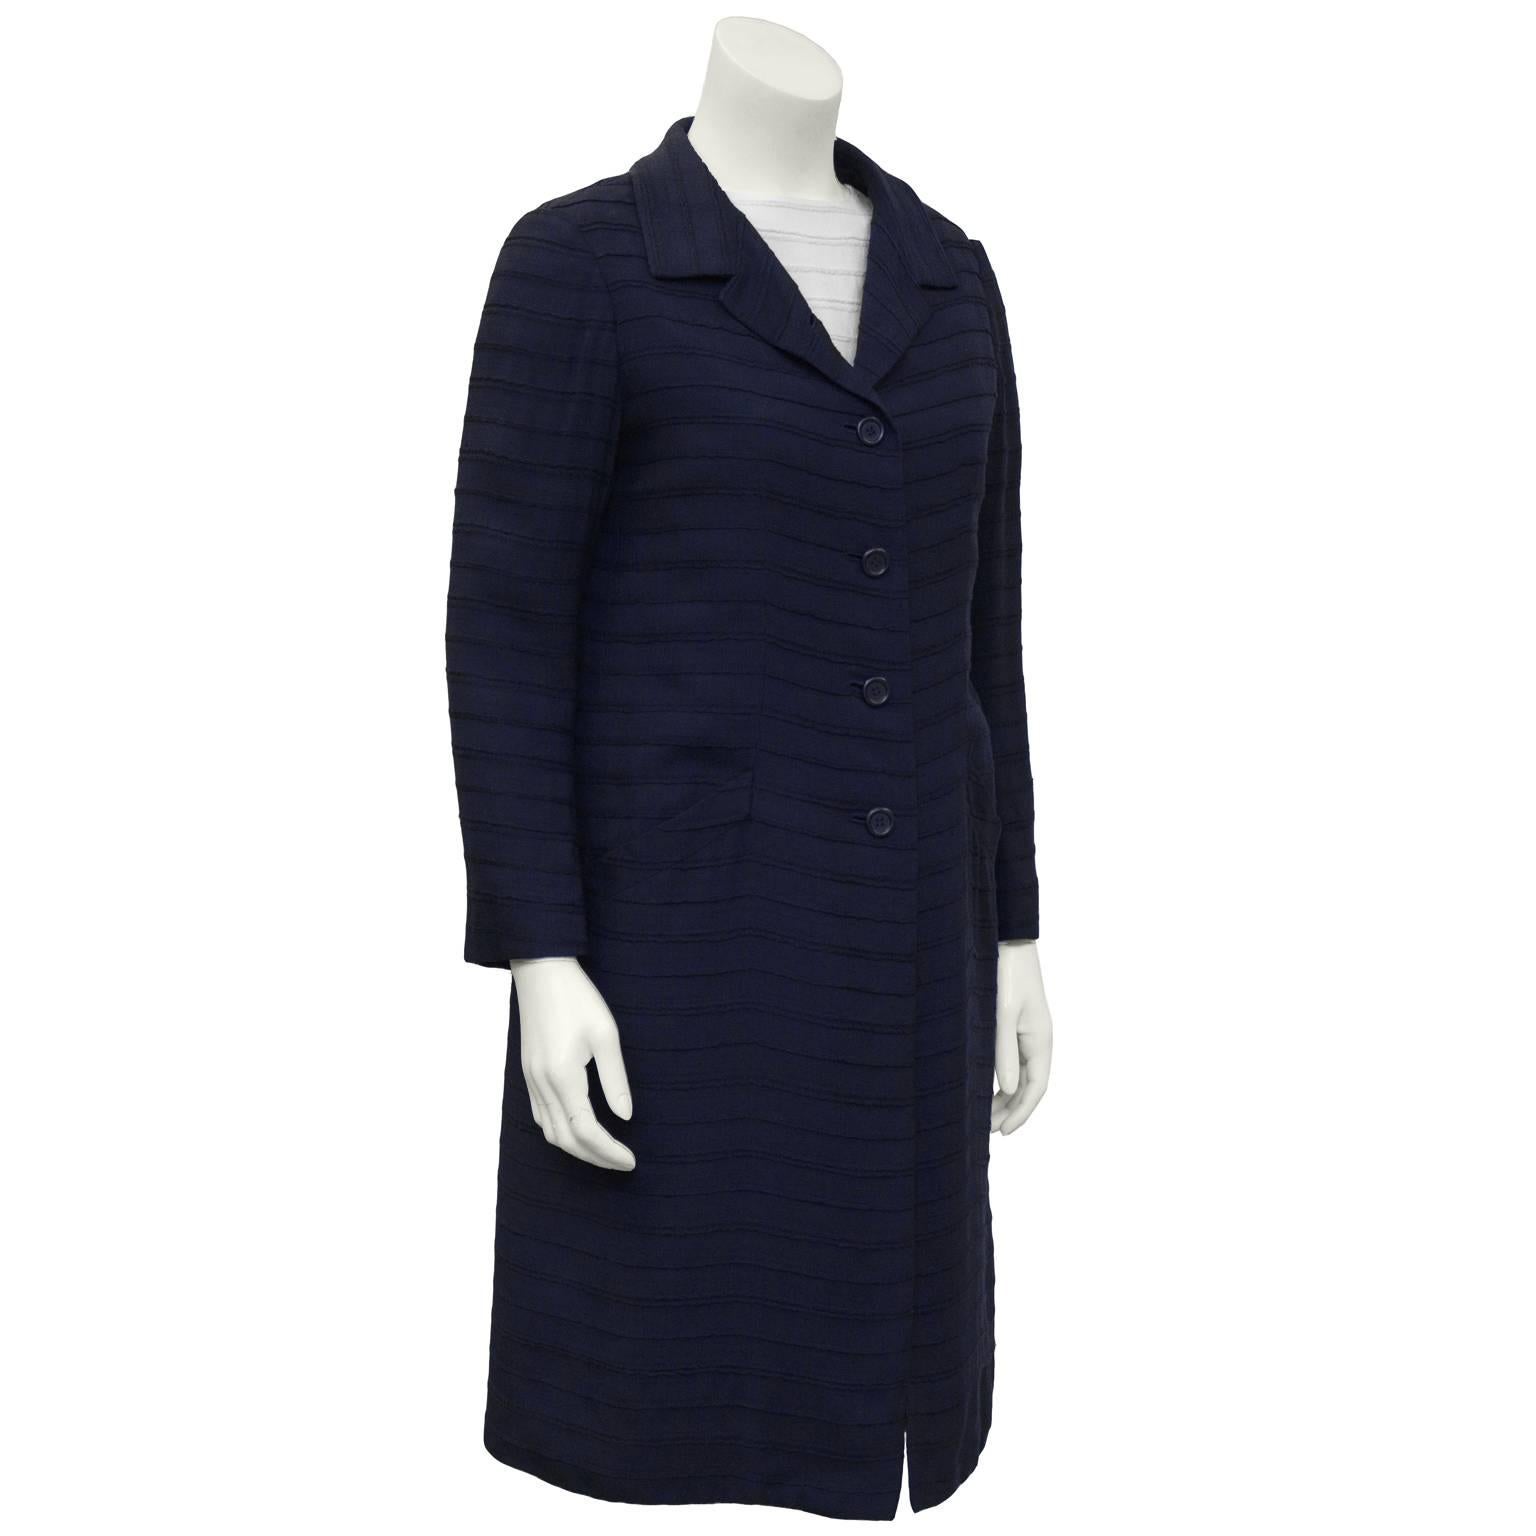 1960's horizontal textured cotton dress and coat ensemble. White sleeveless drop waist, zip-back, Jackie-O style dress complimented by navy single-breasted notch collar coat. Angled slit hip level pockets on the coat, five buttons, yoke back, slight